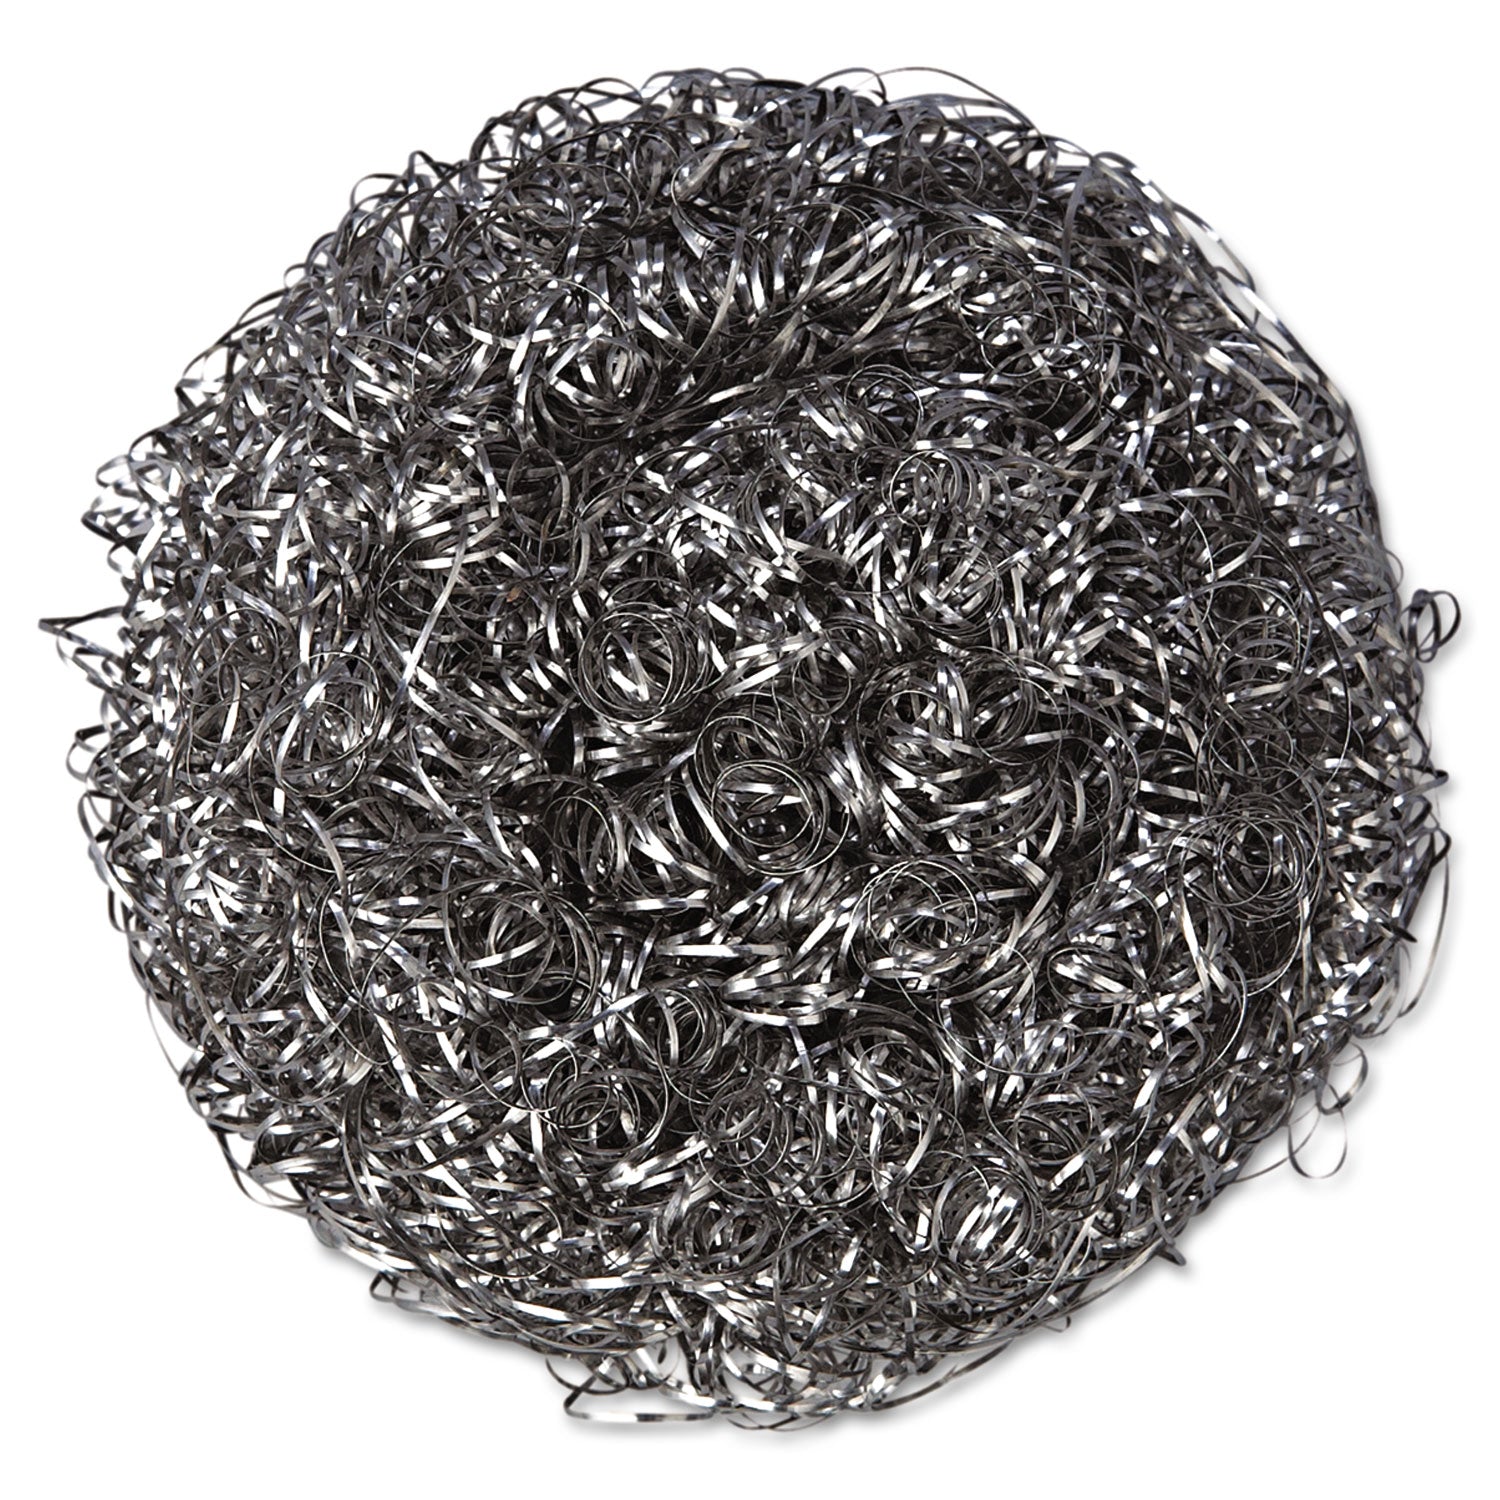 Stainless Steel Scrubbers, Large, 4 x 4, Steel Gray, 12 Scrubbers/Pack, 6 Packs/Carton - 